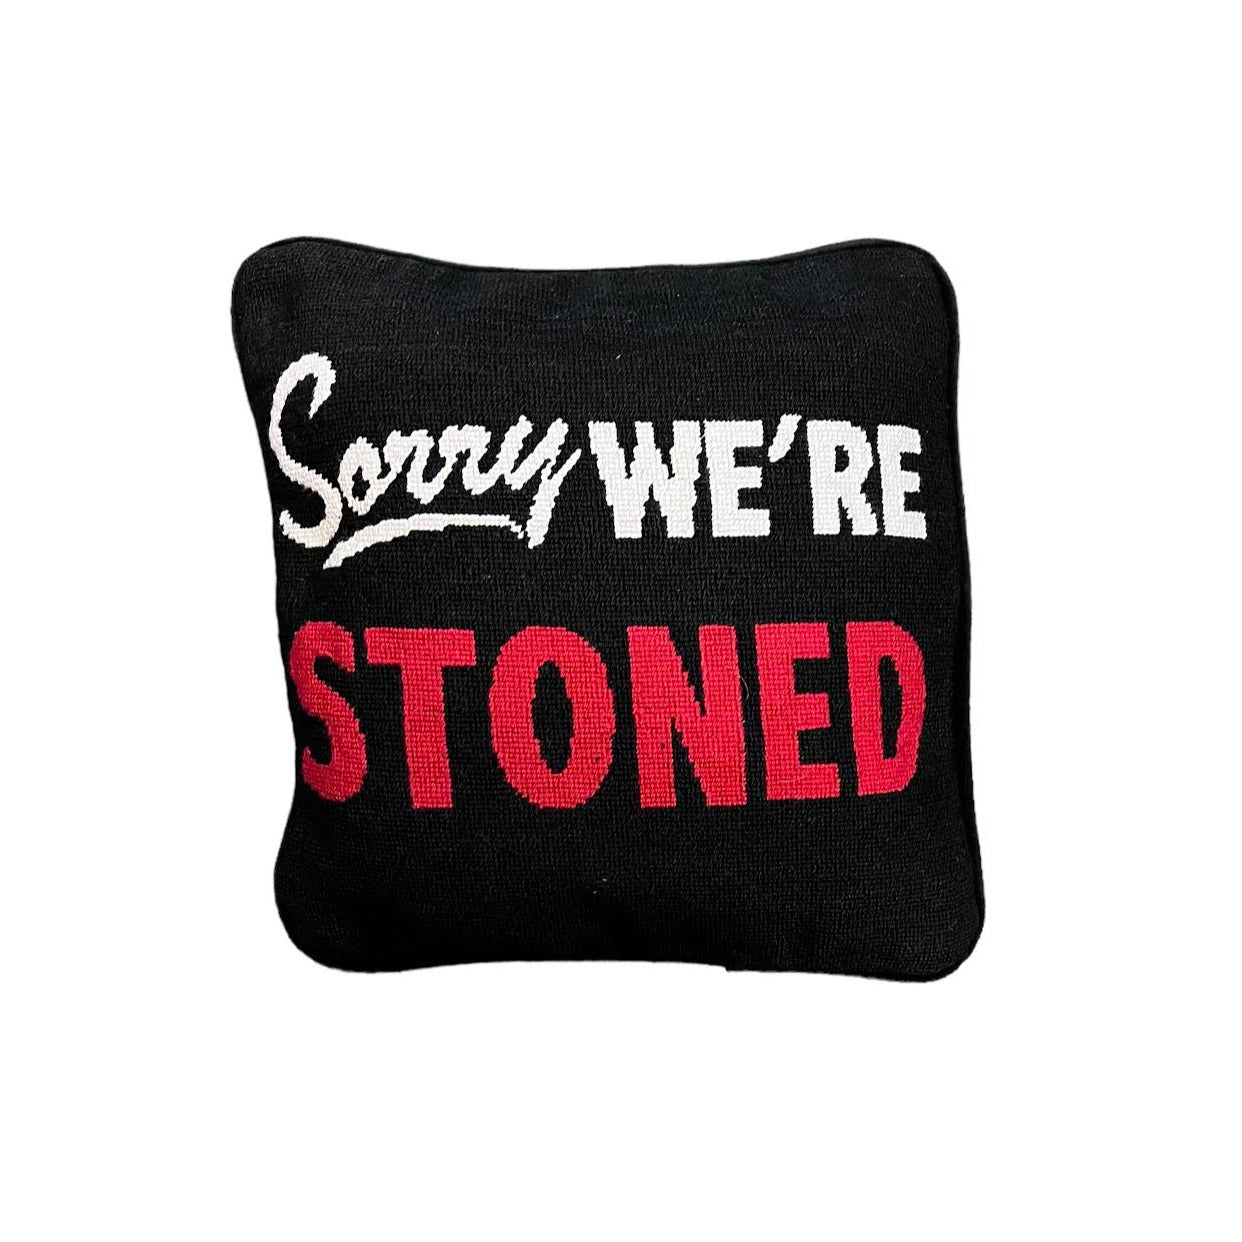 SORRY WE'RE STONED BLACK PILLOW